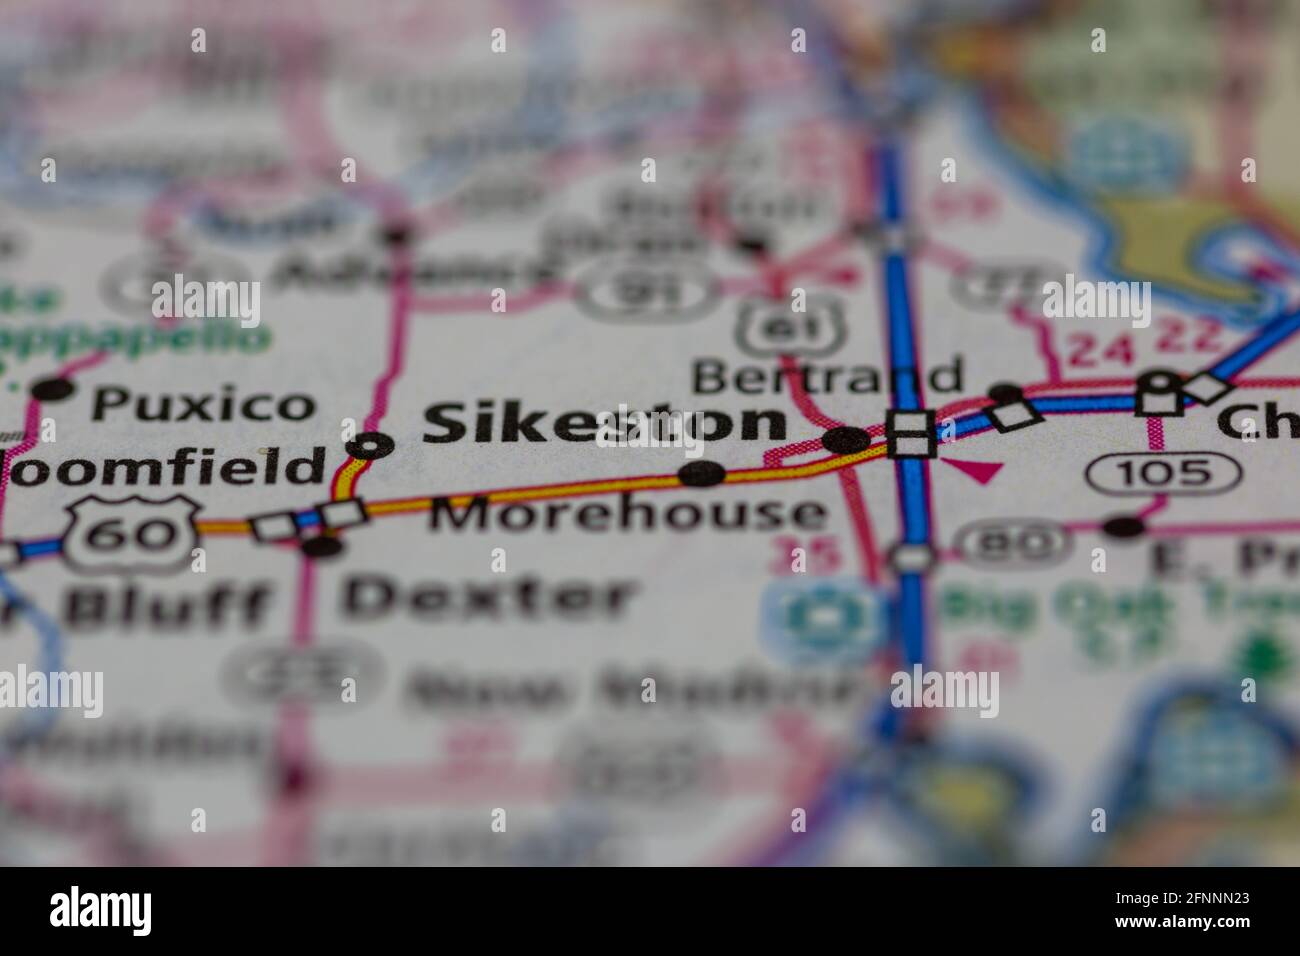 Sikeston Missouri USA shown on a Geography map or road map Stock Photo